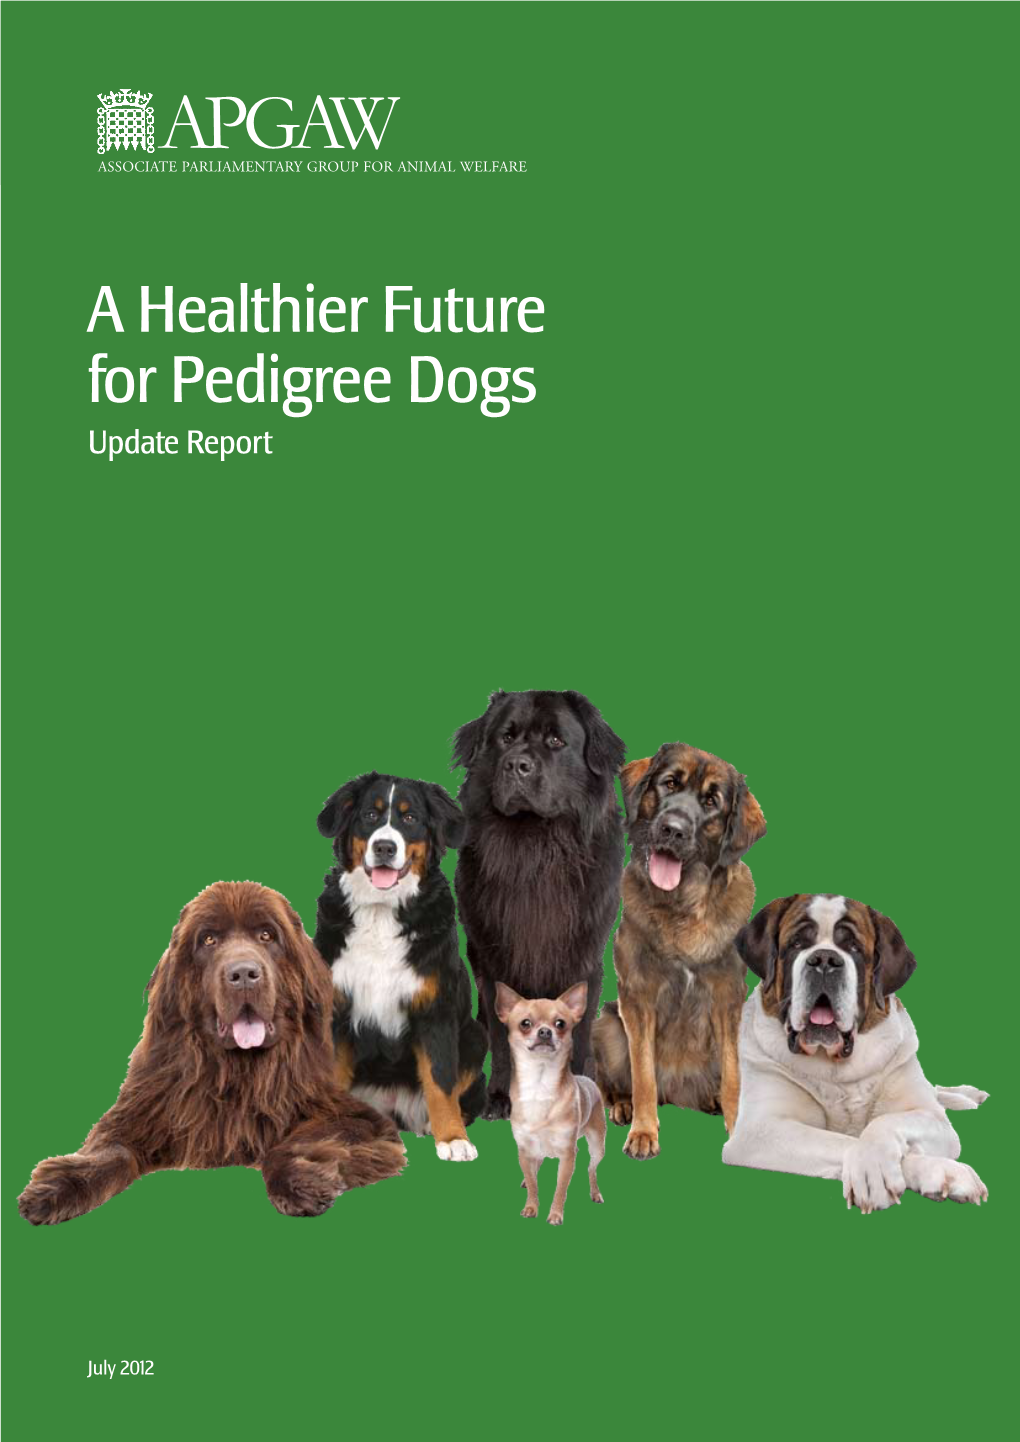 A Healthier Future for Pedigree Dogs Update Report